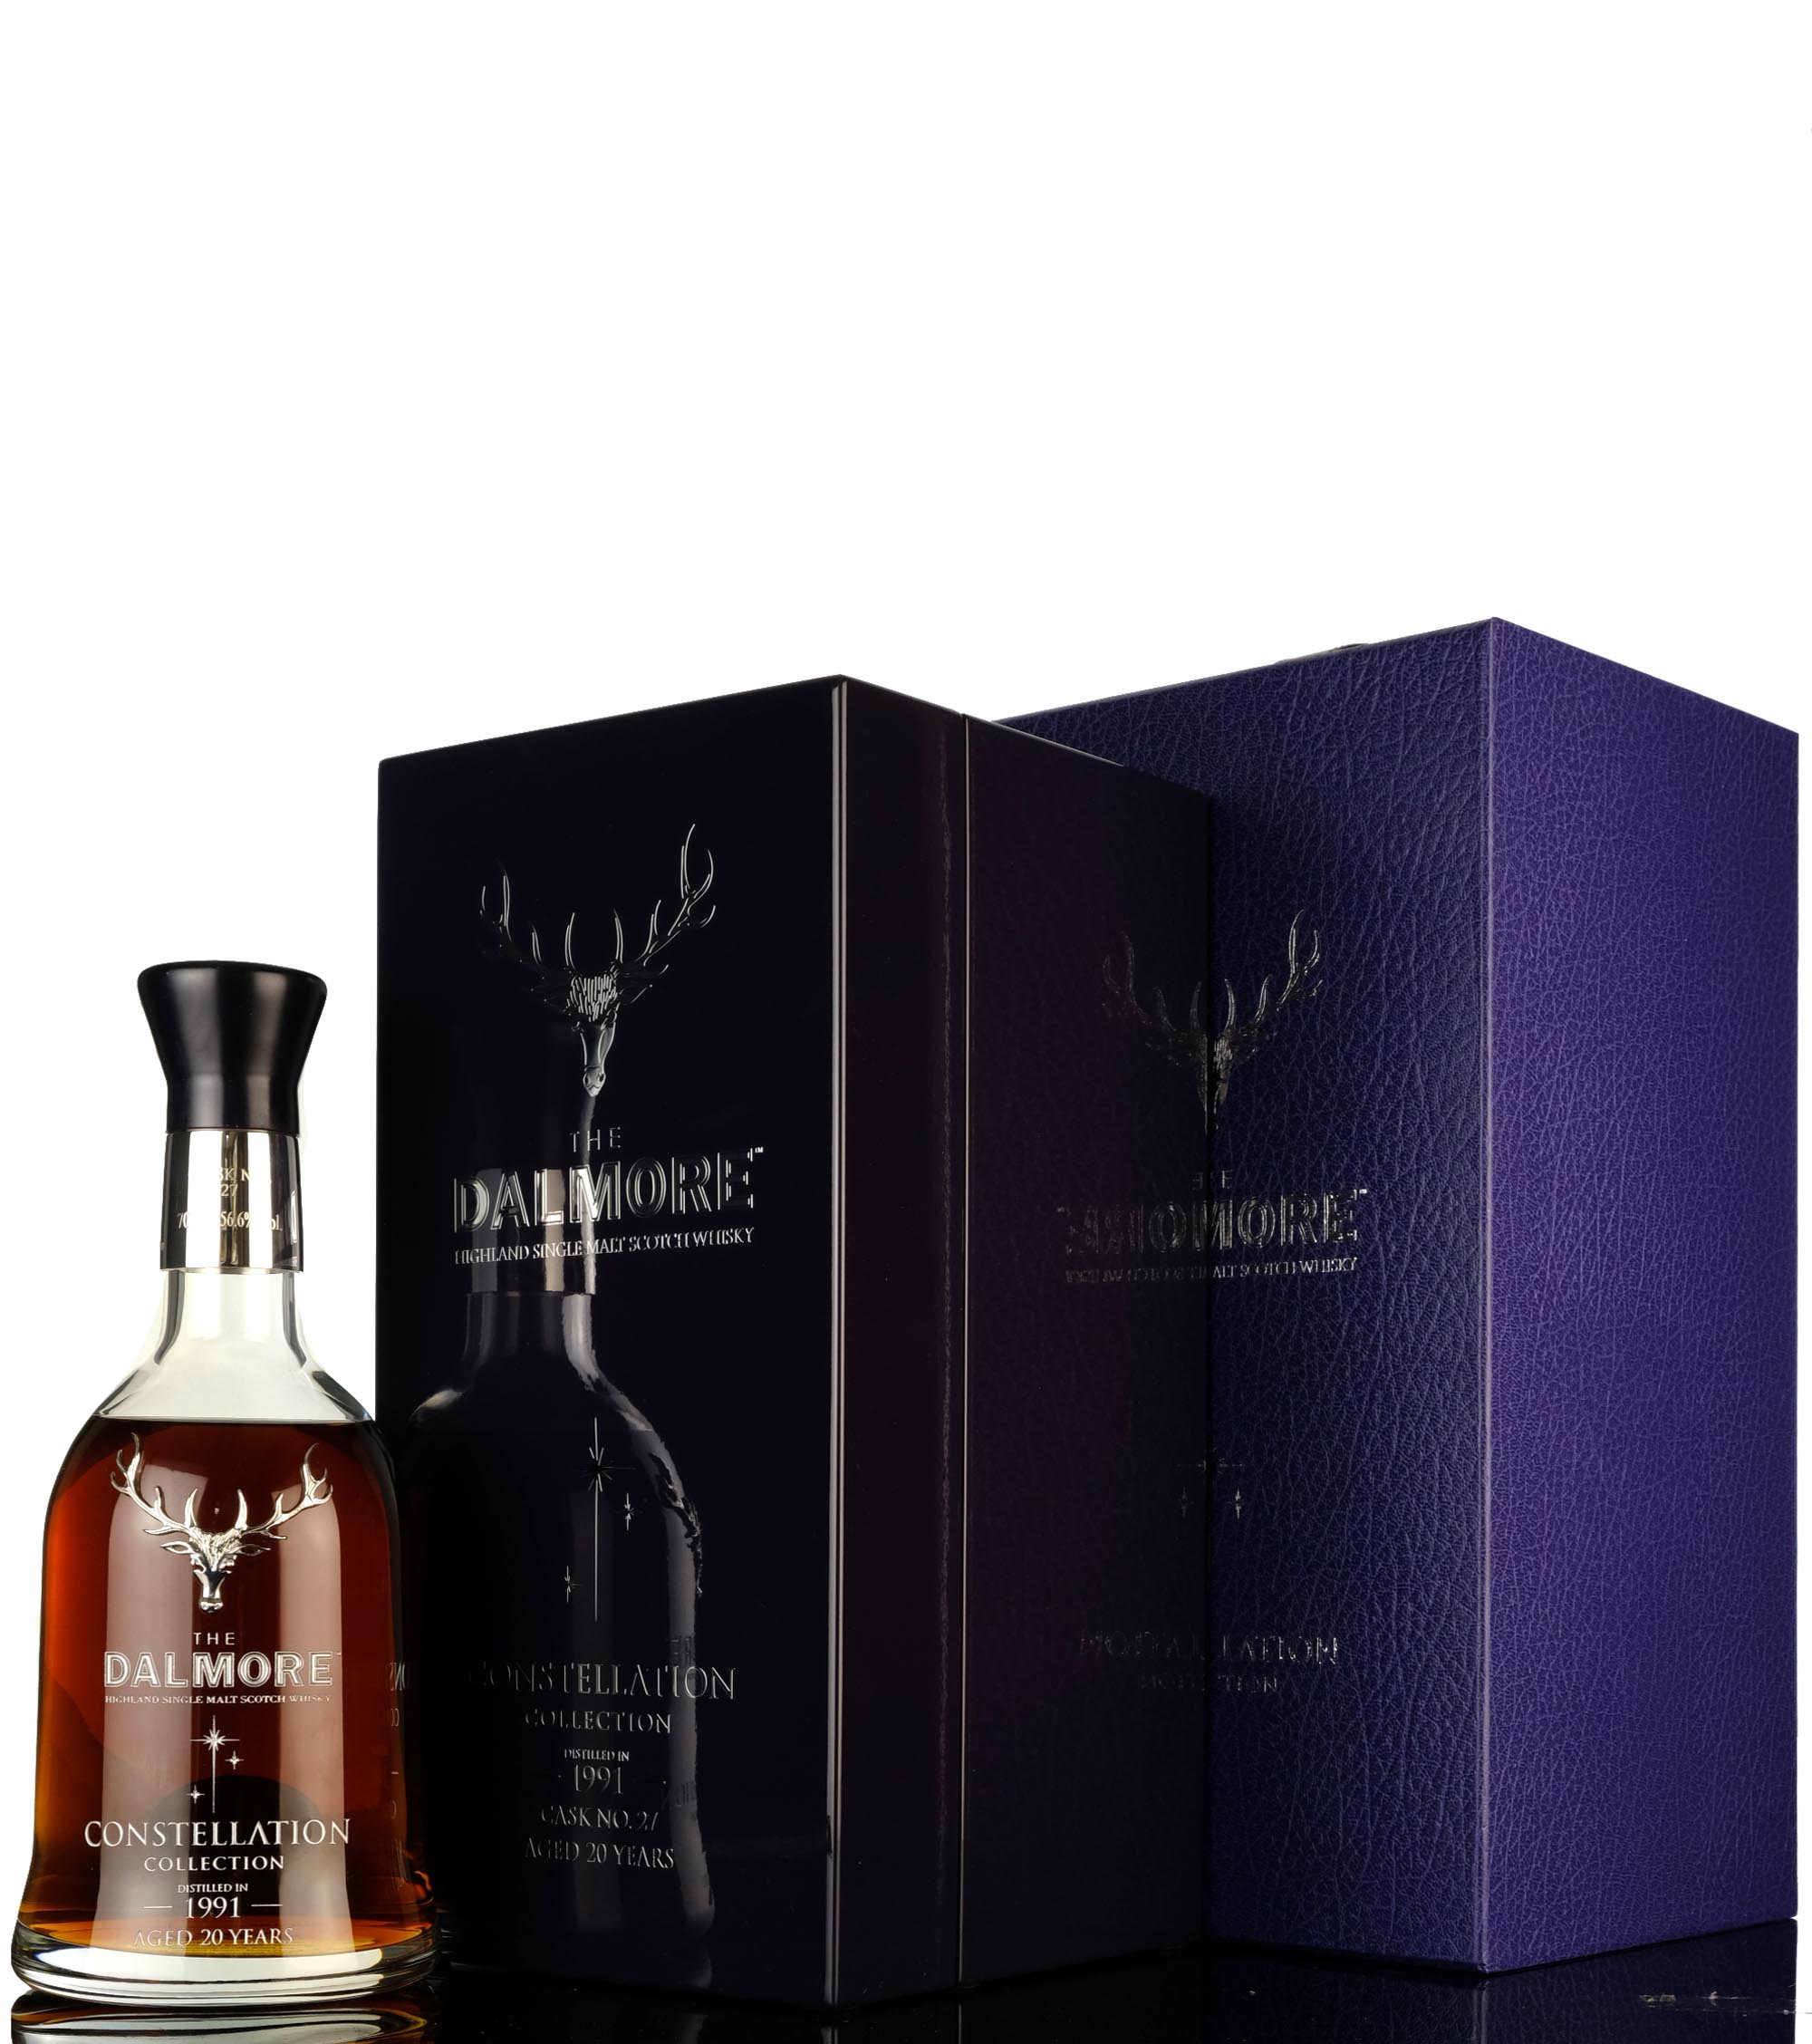 Dalmore 1991-2012 - 20 Year Old - Single Cask 27 - Constellation Collection